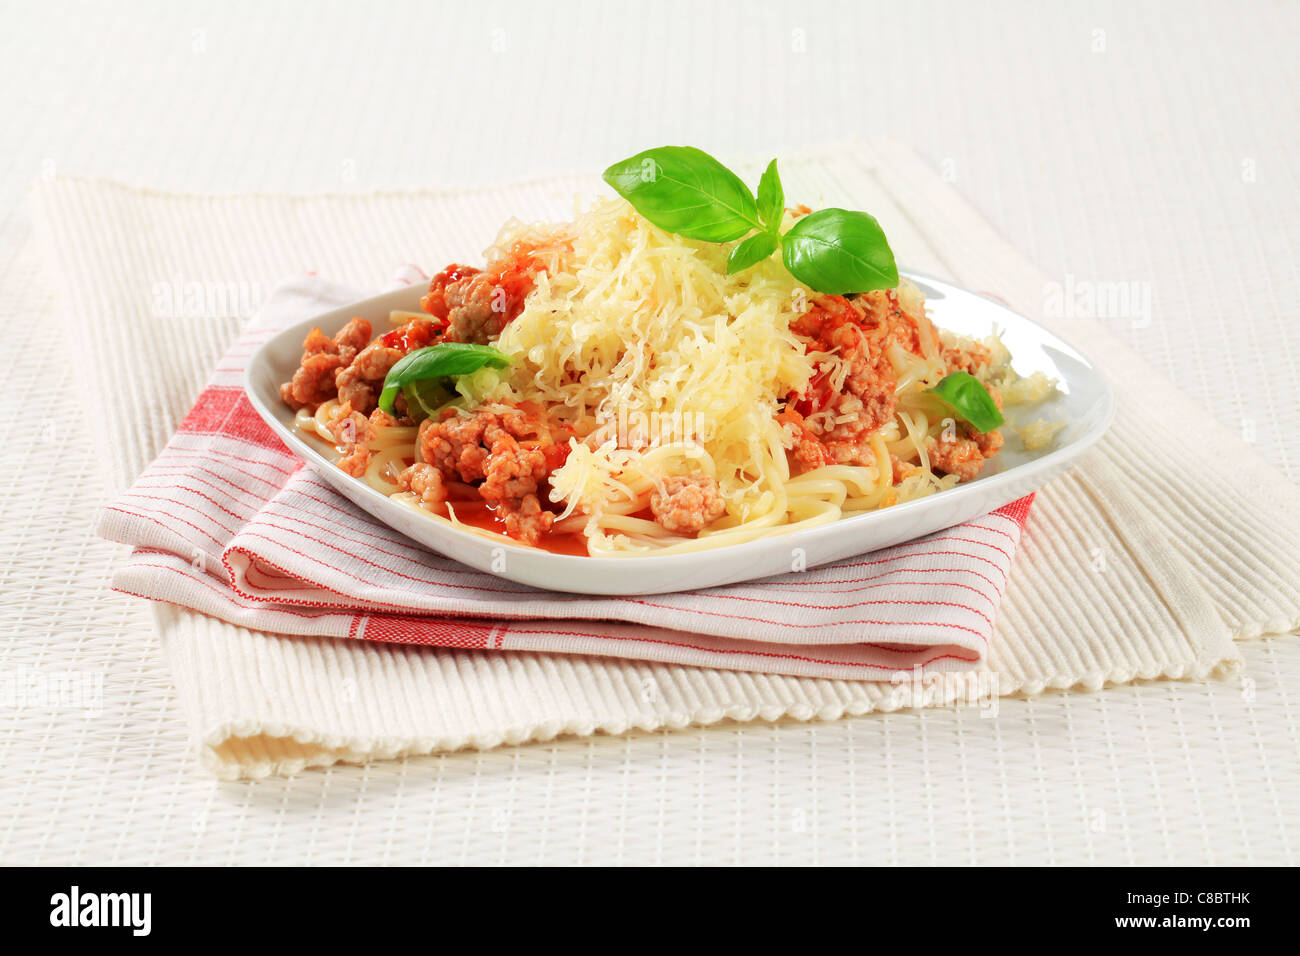 Spaghetti with minced meat and tomato sprinkled with cheese Stock Photo